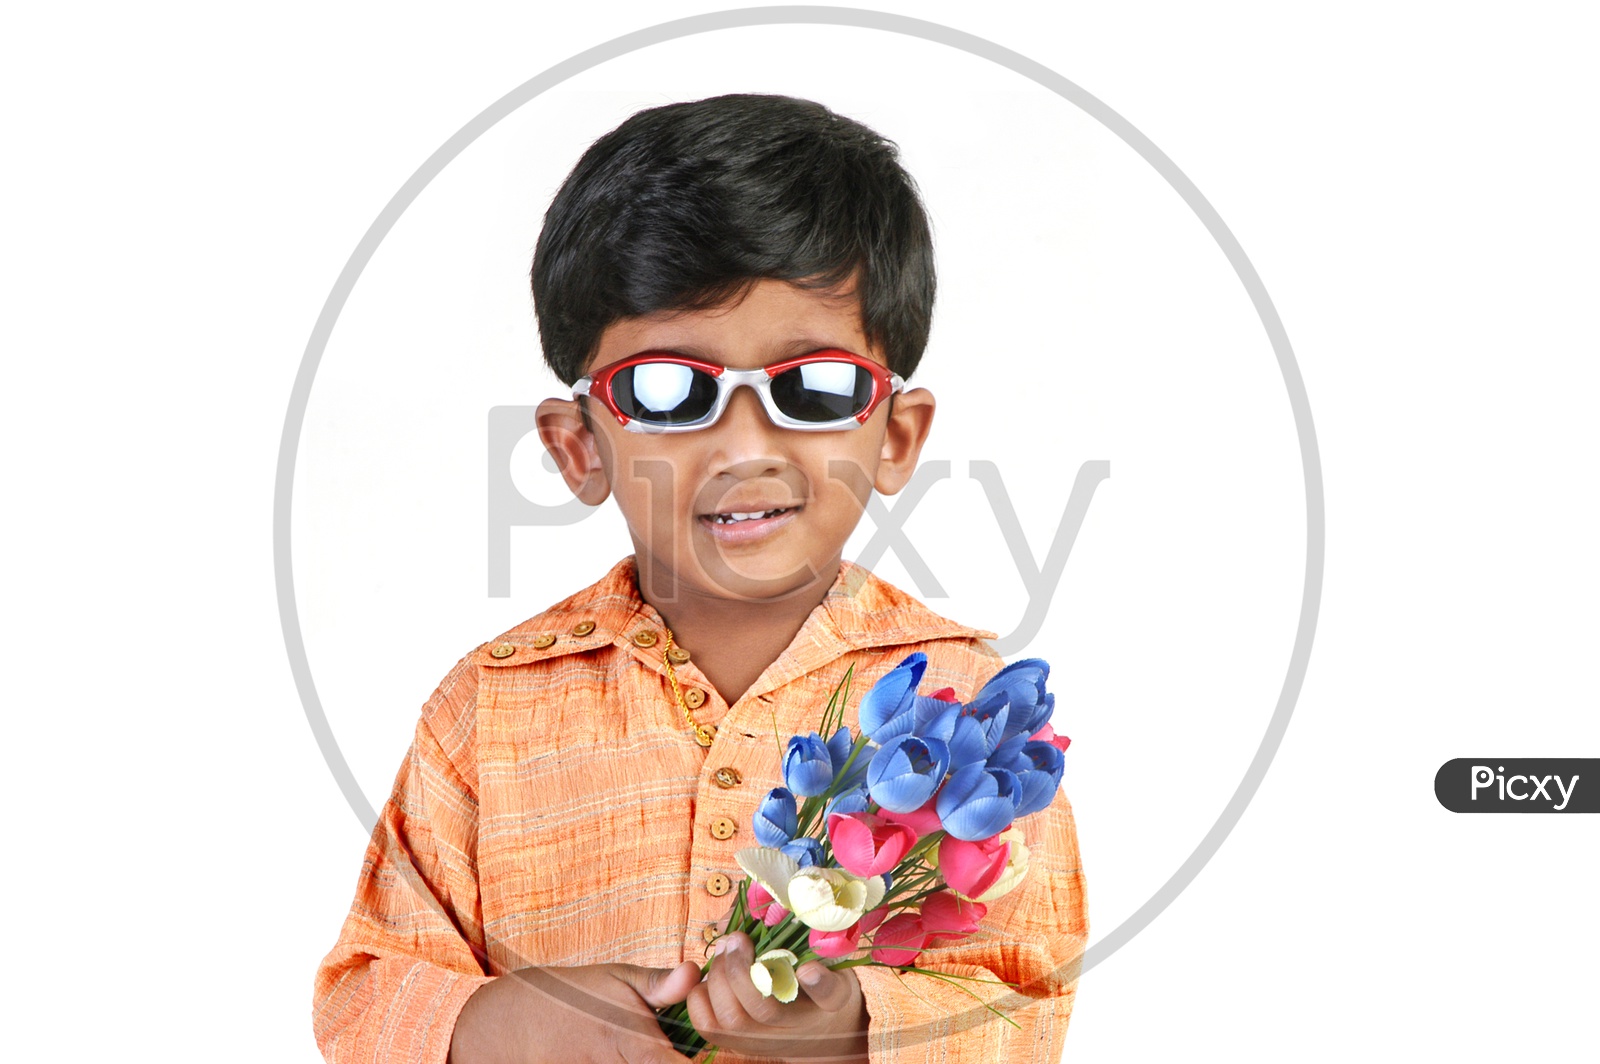 Indian boy wearing sunglasses holding flowers